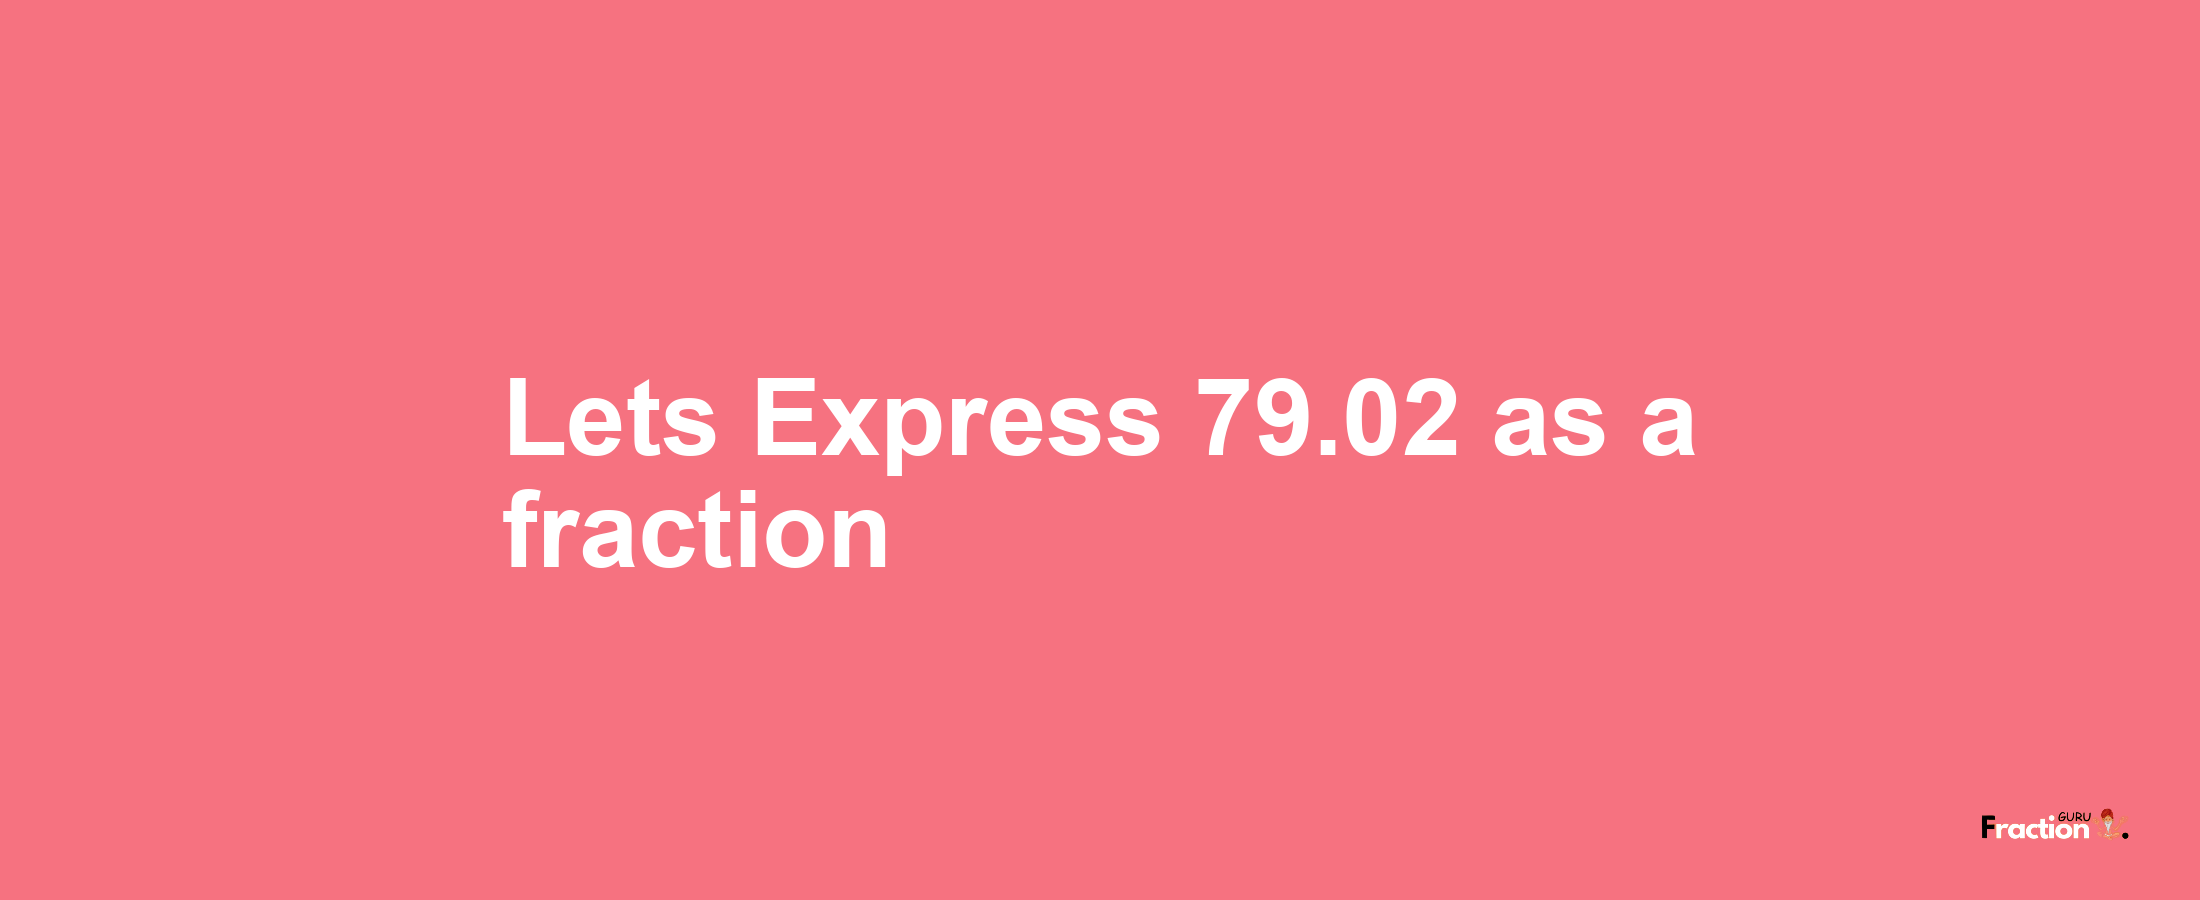 Lets Express 79.02 as afraction